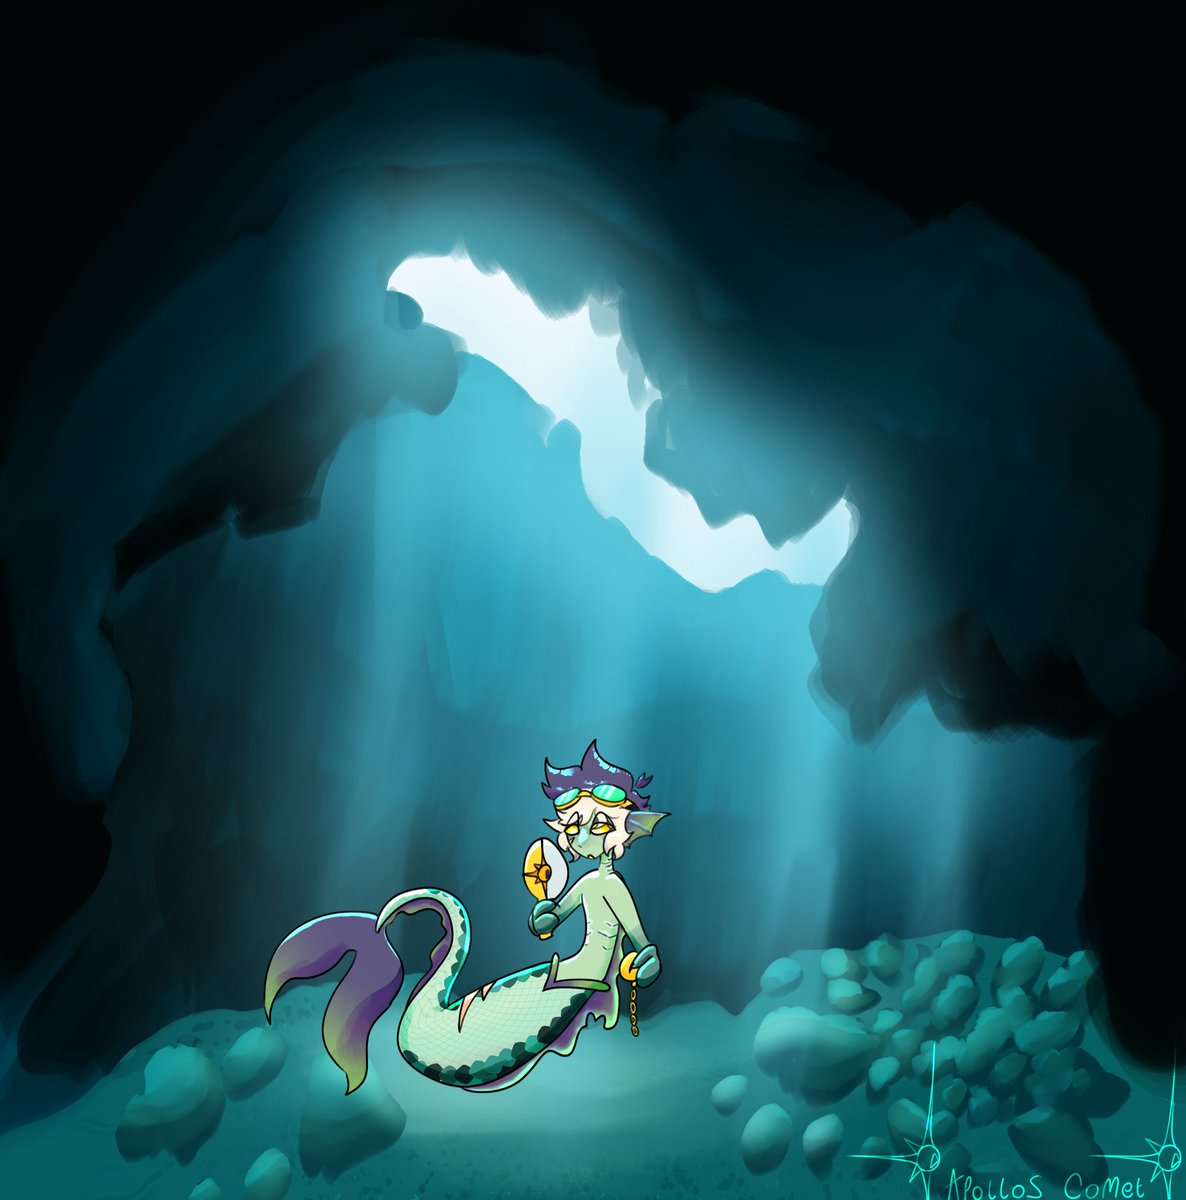 Heres the piece for day 4 of mermay!(scavenge), I messed around with backgrounds again and tried to go with a painterly approach i hope u guys like it cause i worked hard on it and tried my best! #OC #ocart #art #artist #mermay2024 #Mermaid #meroc #mermay #artchallenge